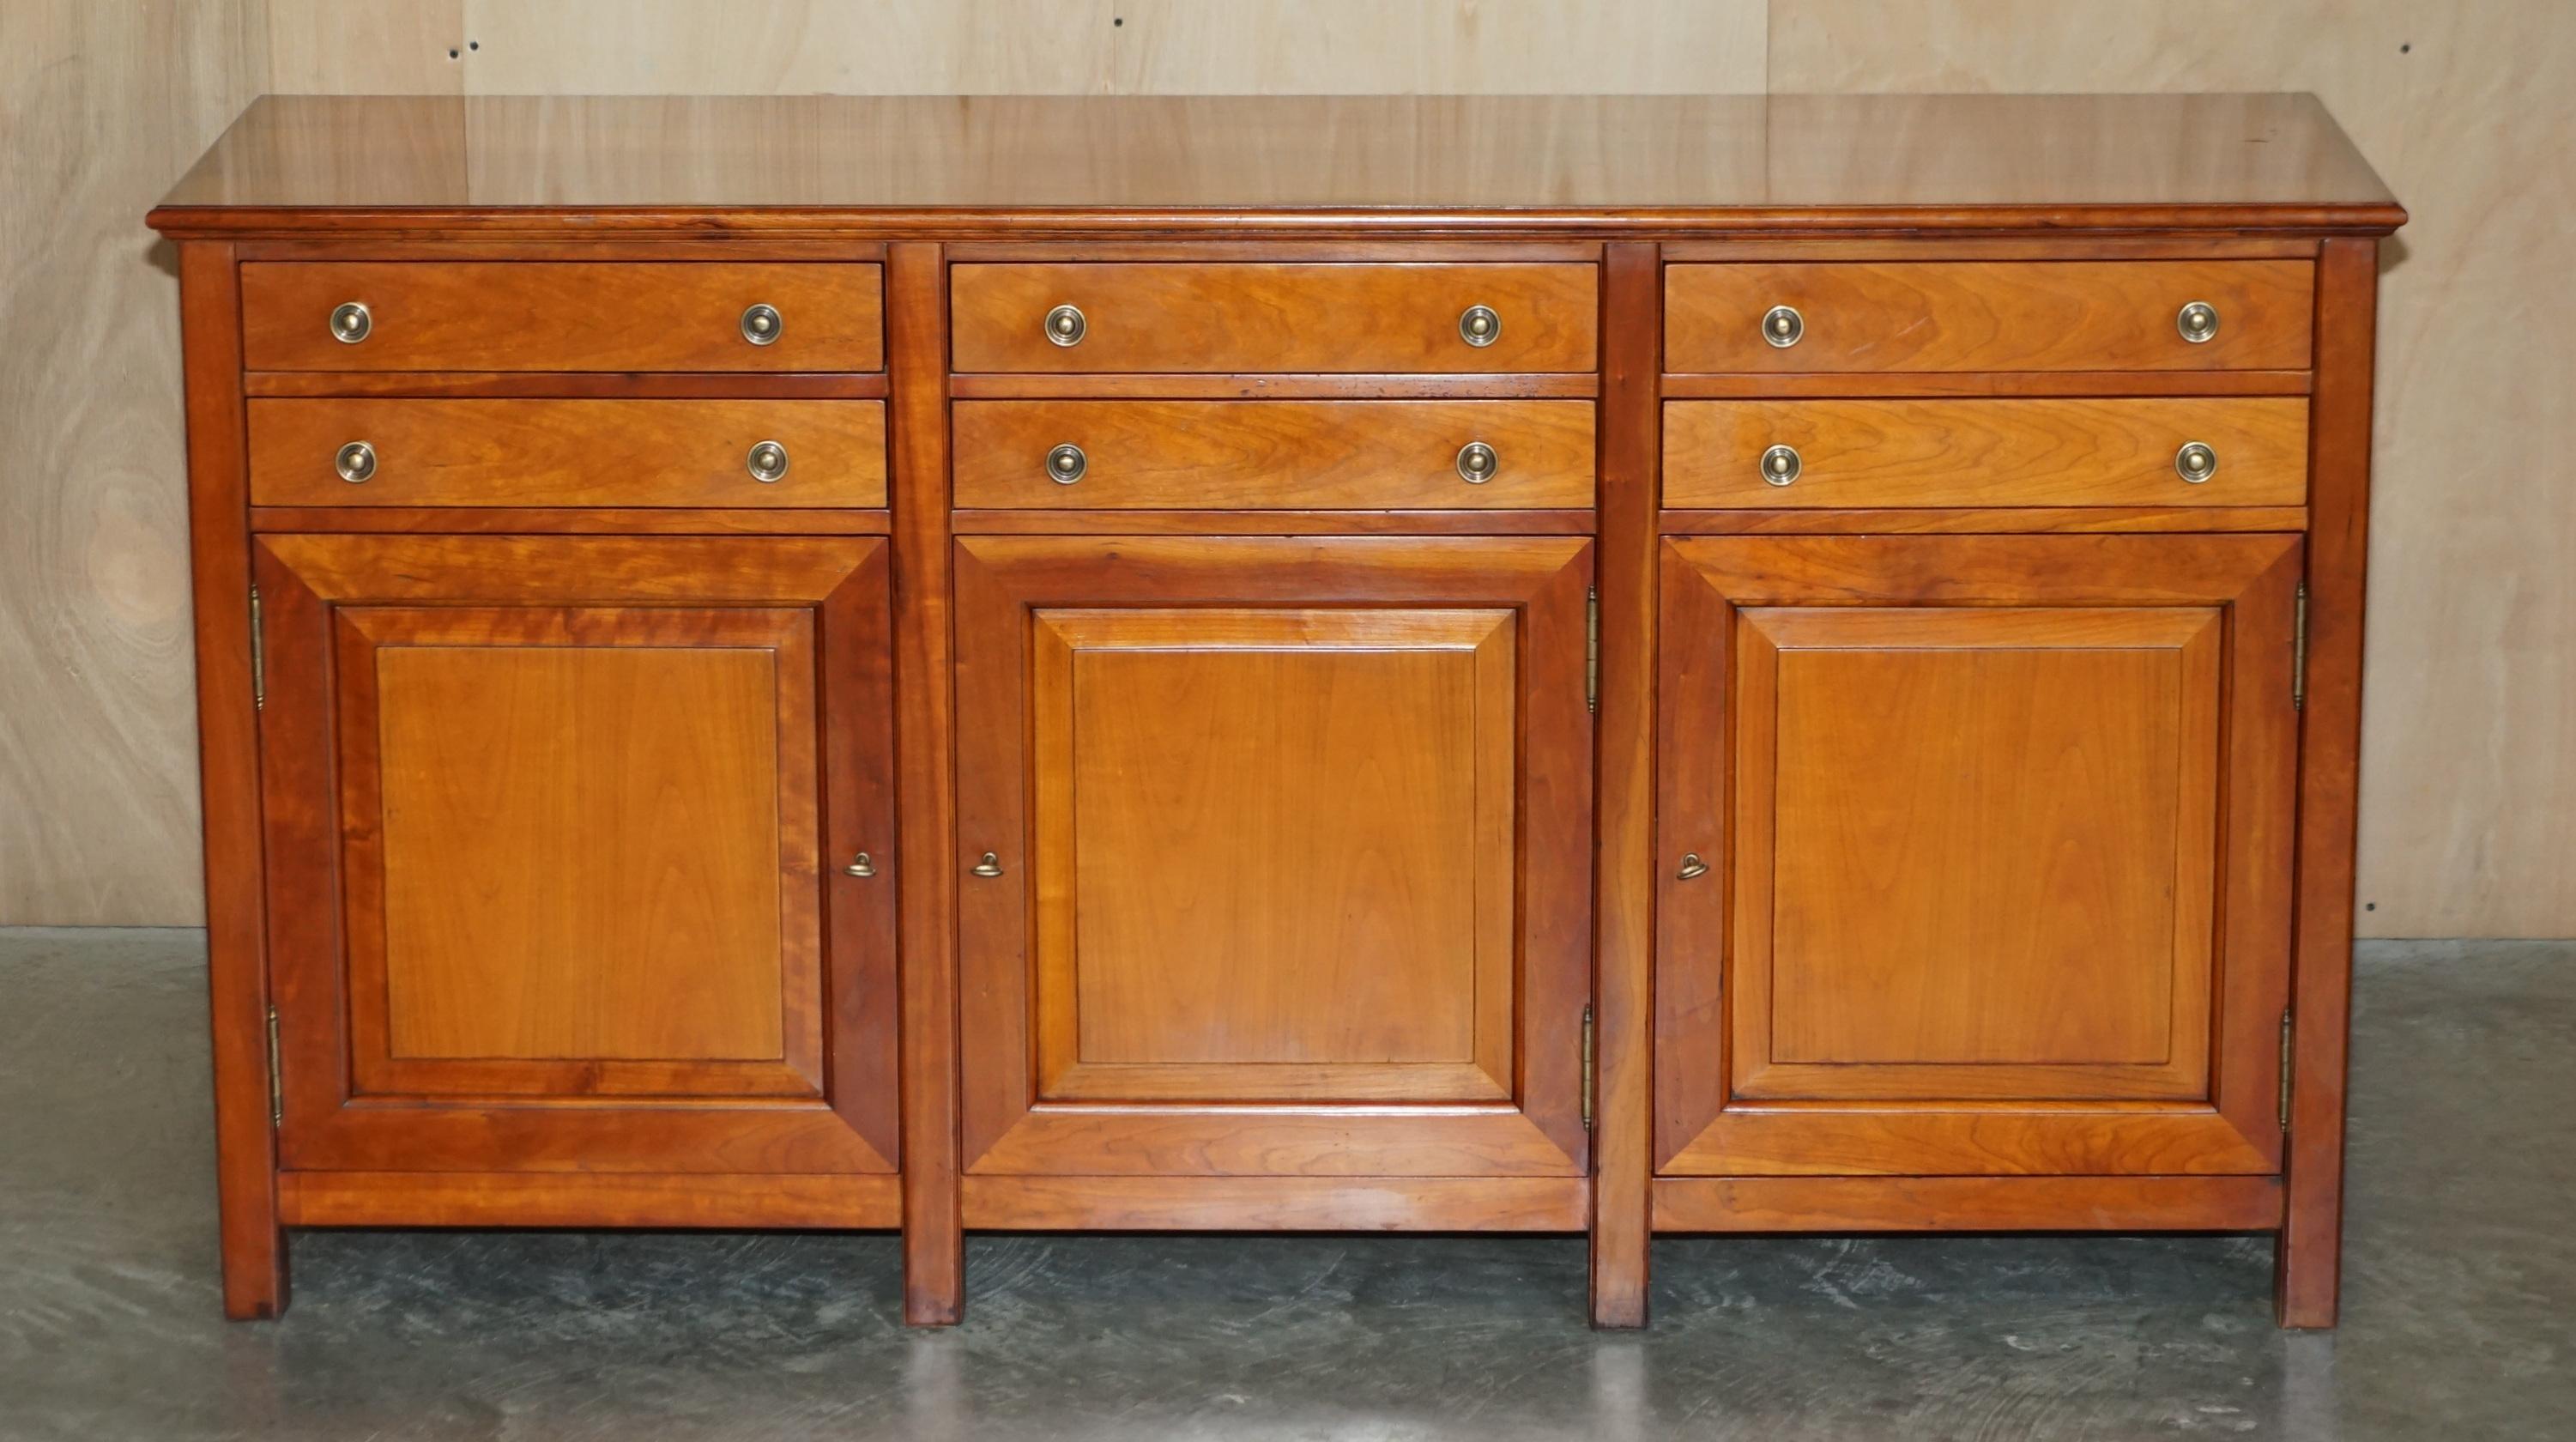 We ar delighted to offer for sale this stunning, hand made in England from solid Cherrywood, Multiyork sideboard with six drawers.

A very good looking well made and solid piece of furniture, this piece has a wonderful cherry patina and looks